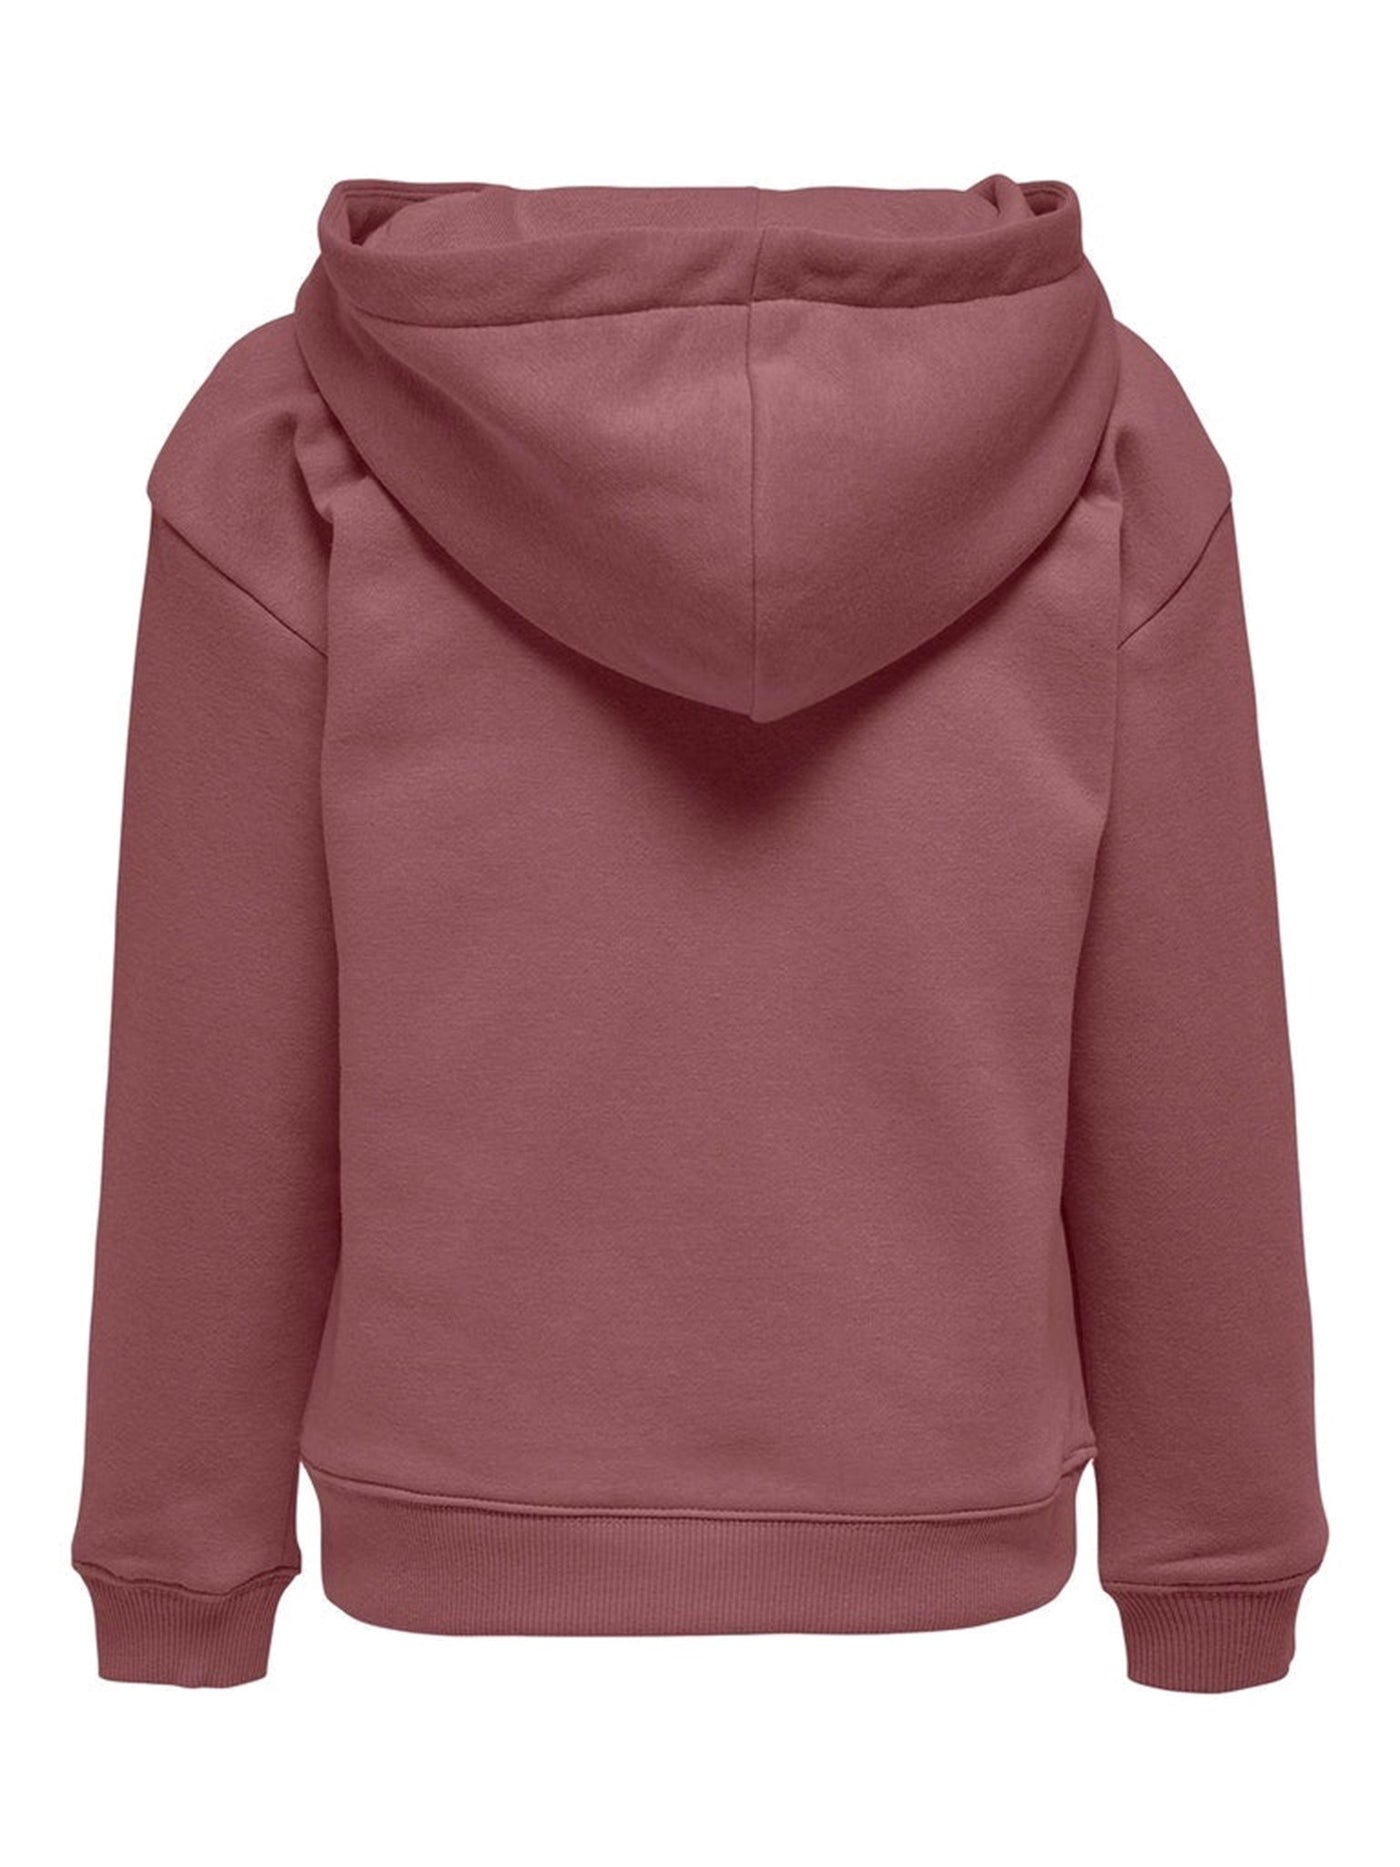 Every Life Logo Hoodie - Rose Brown - Kids Only 2